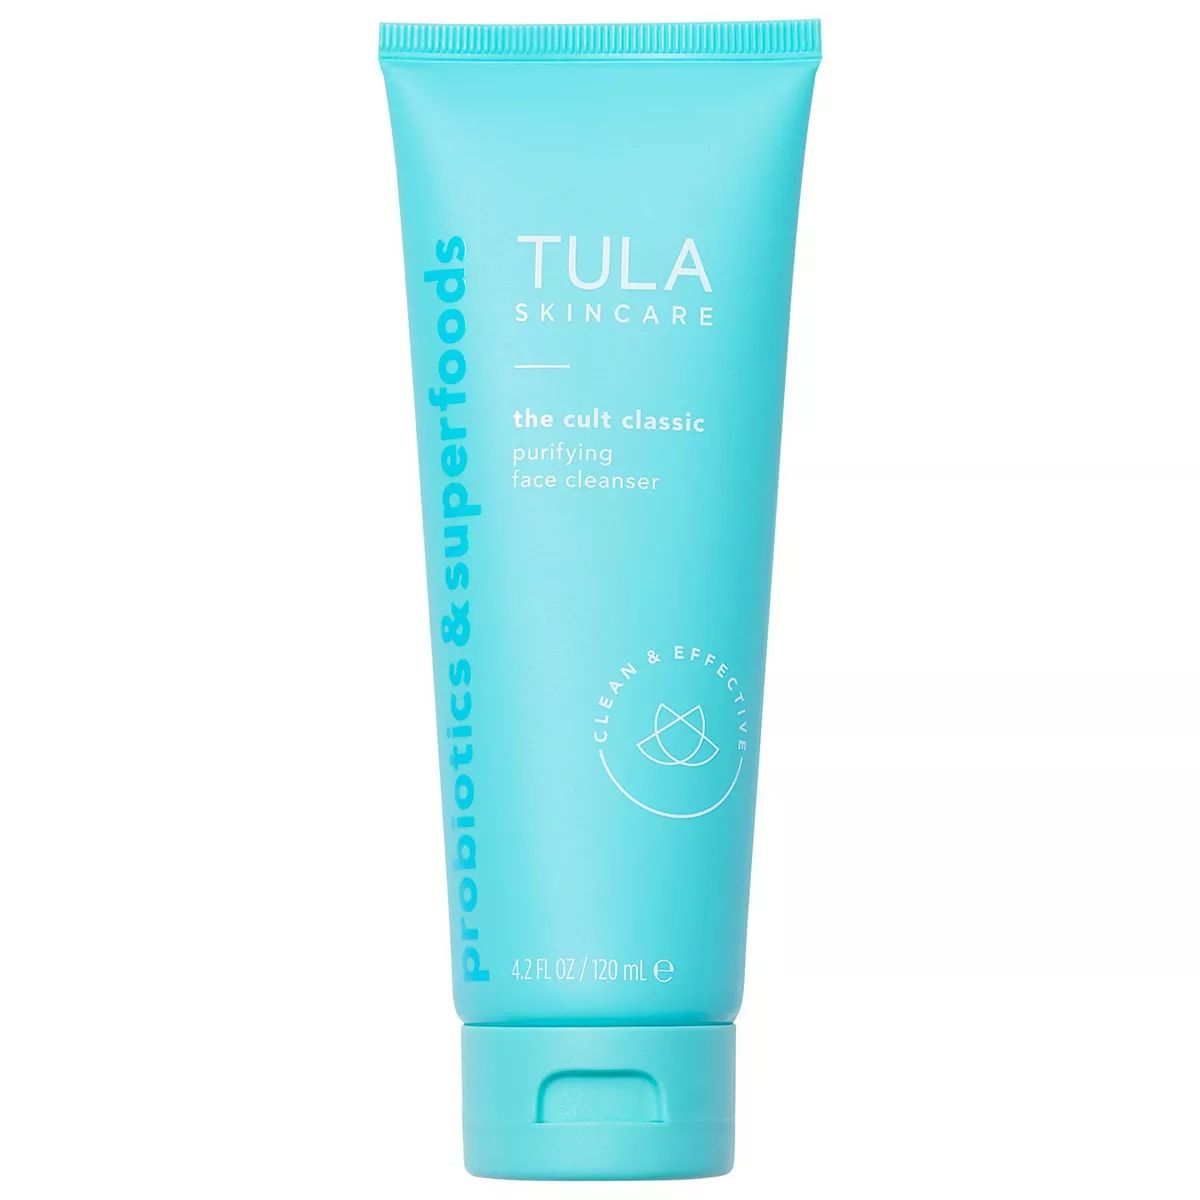 TULA Skincare The Cult Classic Purifying Face Cleanser | Kohl's